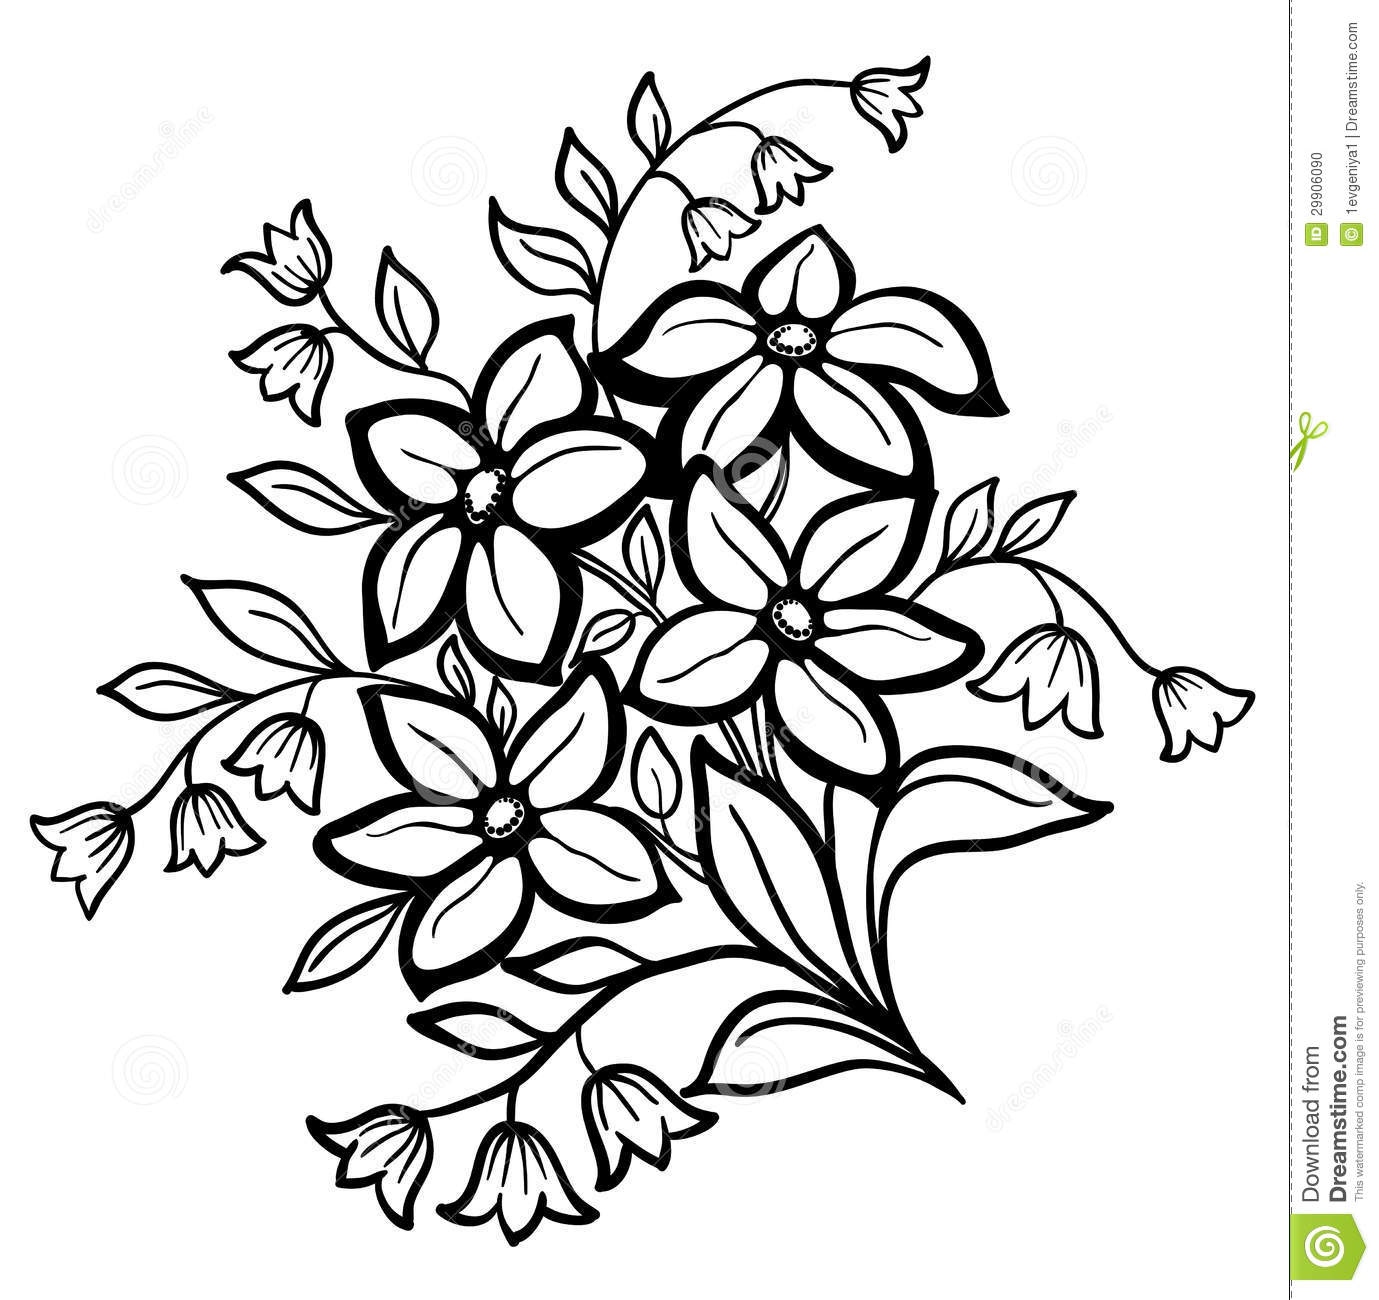 The best free Arrangement drawing images. Download from 113 free